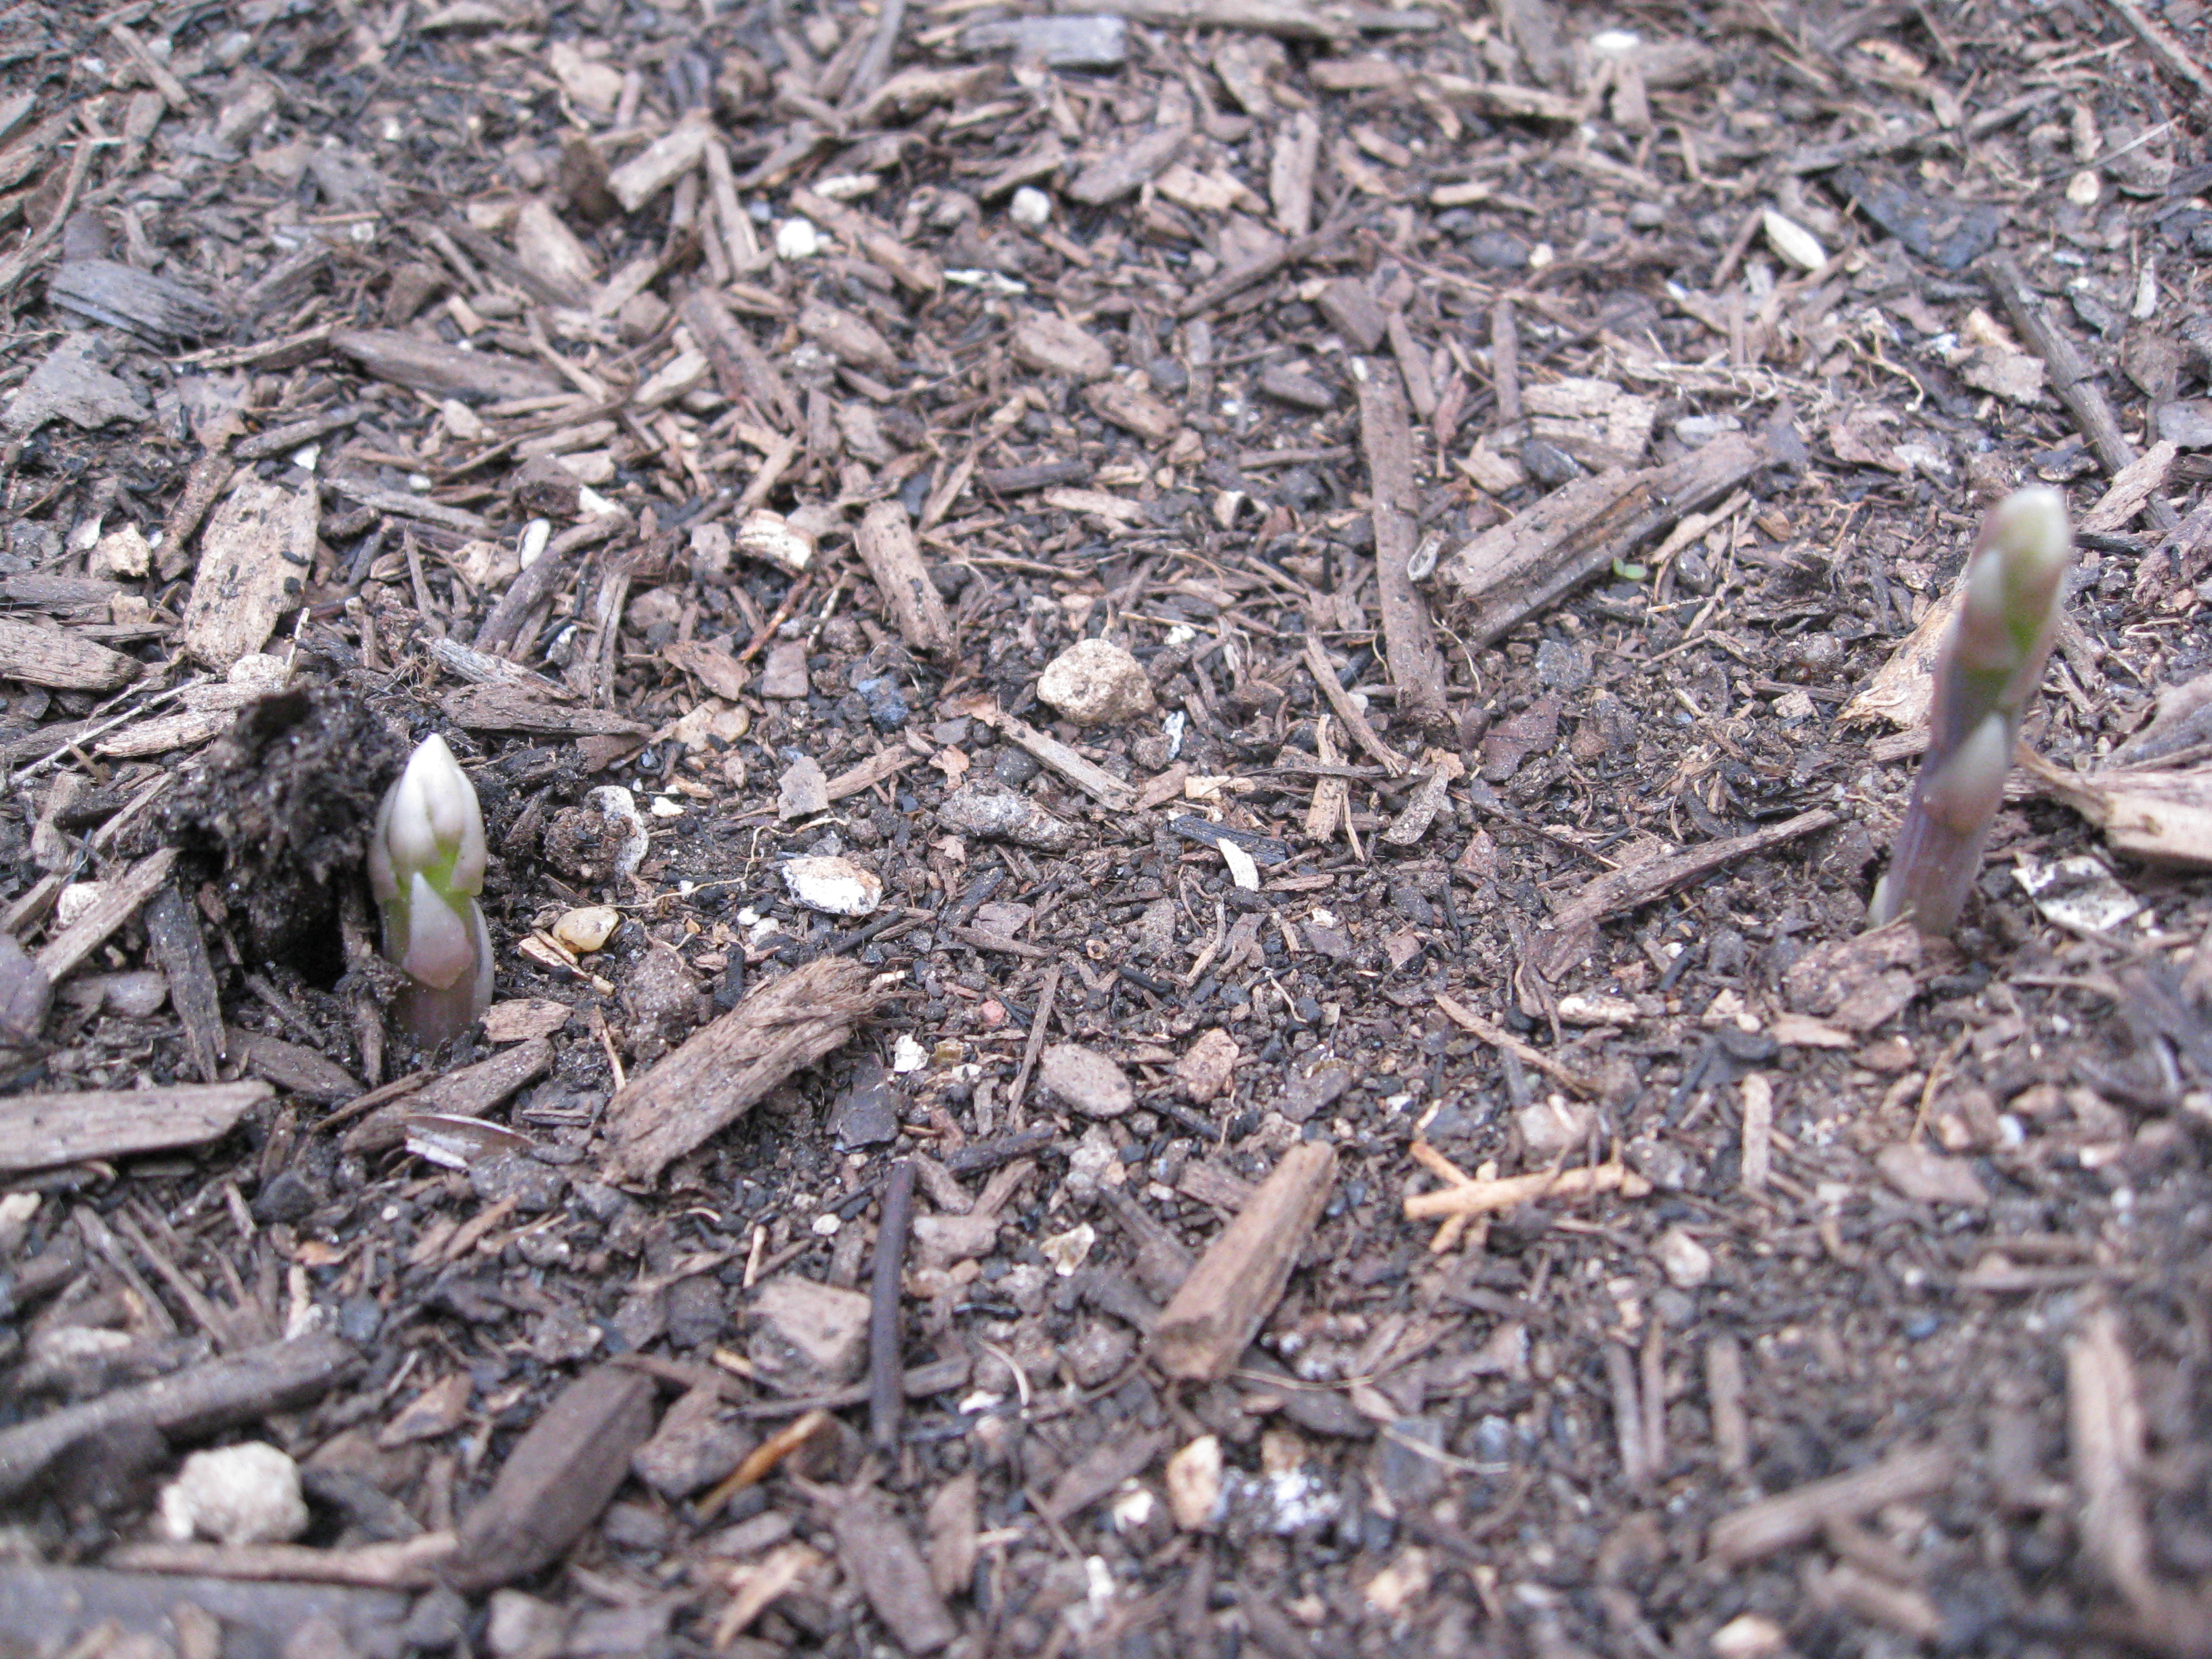 Asparagus is just waking up